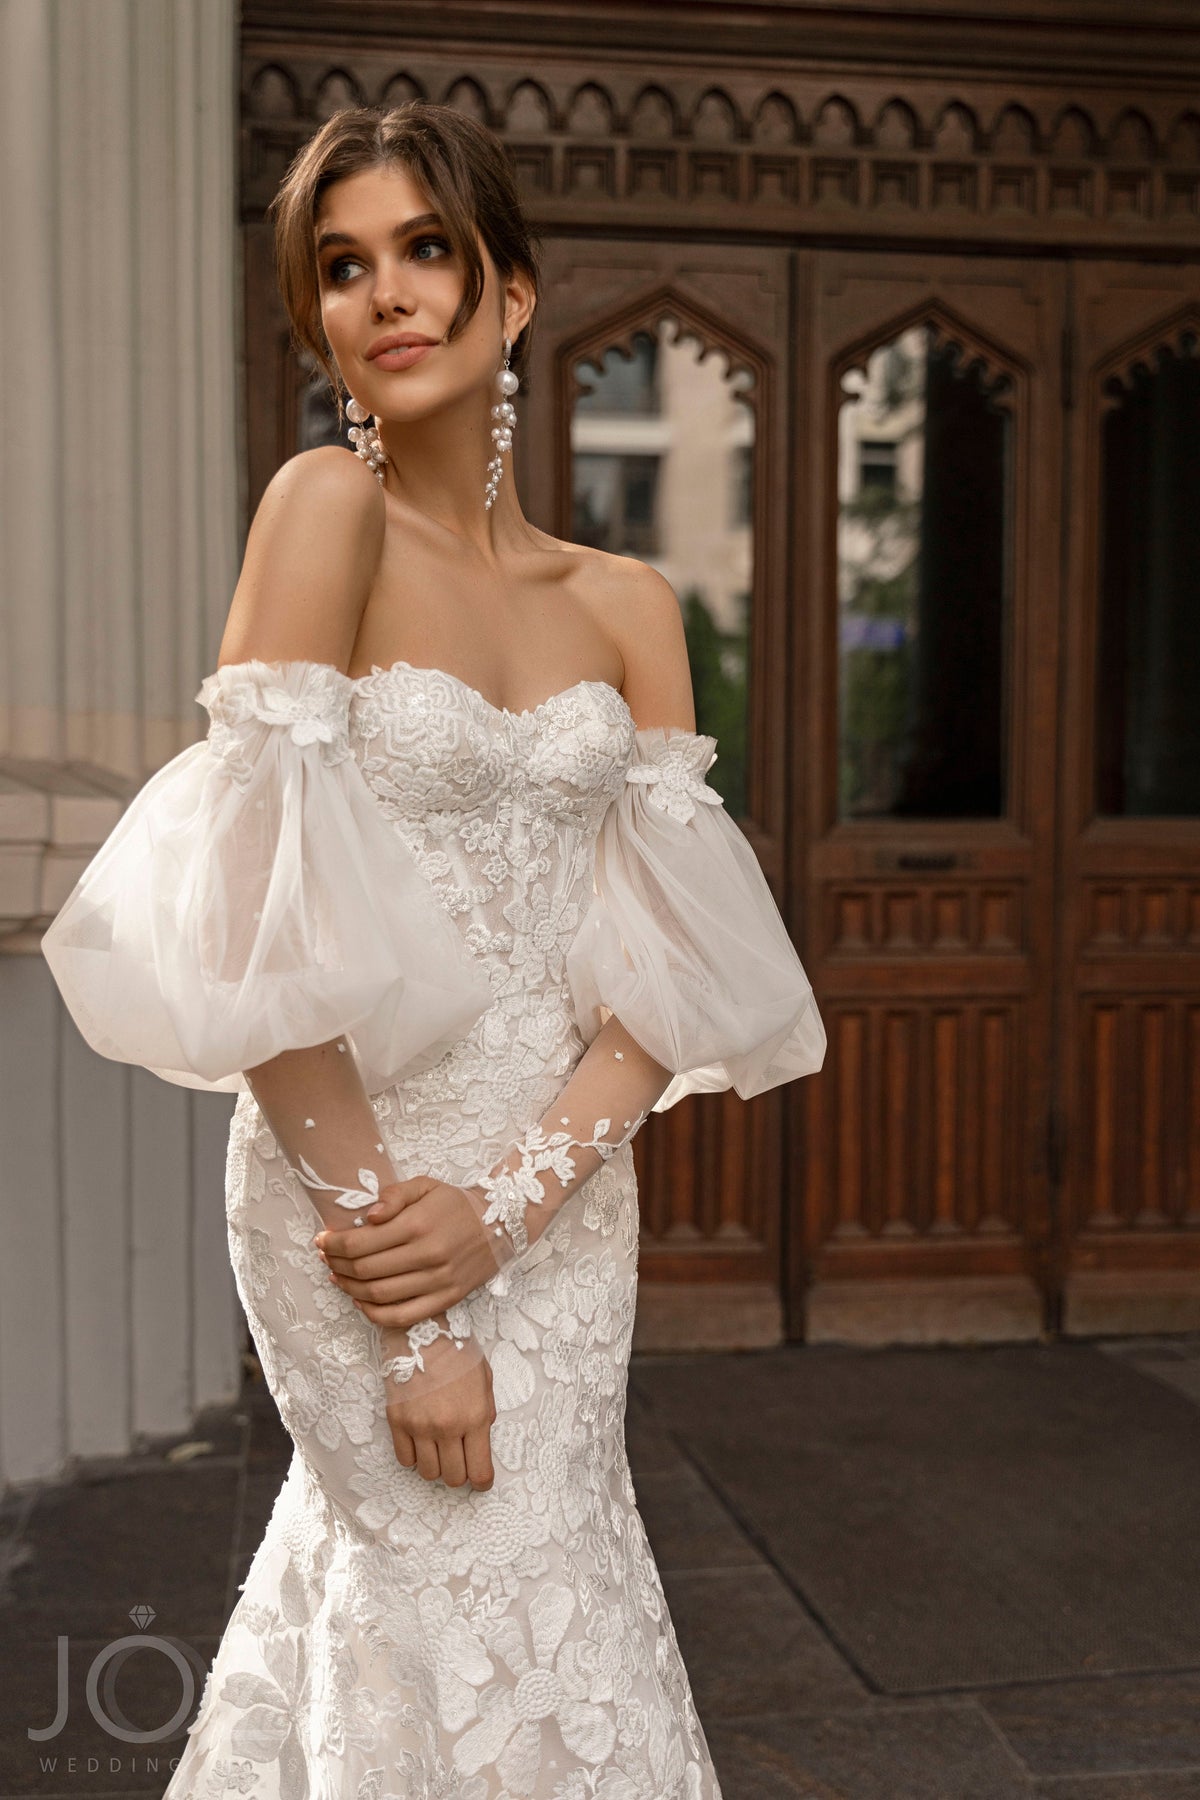 Modern Large Floral Lace Off the Shoulder Balloon Sleeve Open Back Wedding Dress Bridal Gown Detachable Train 2 Looks Bustier Sweetheart